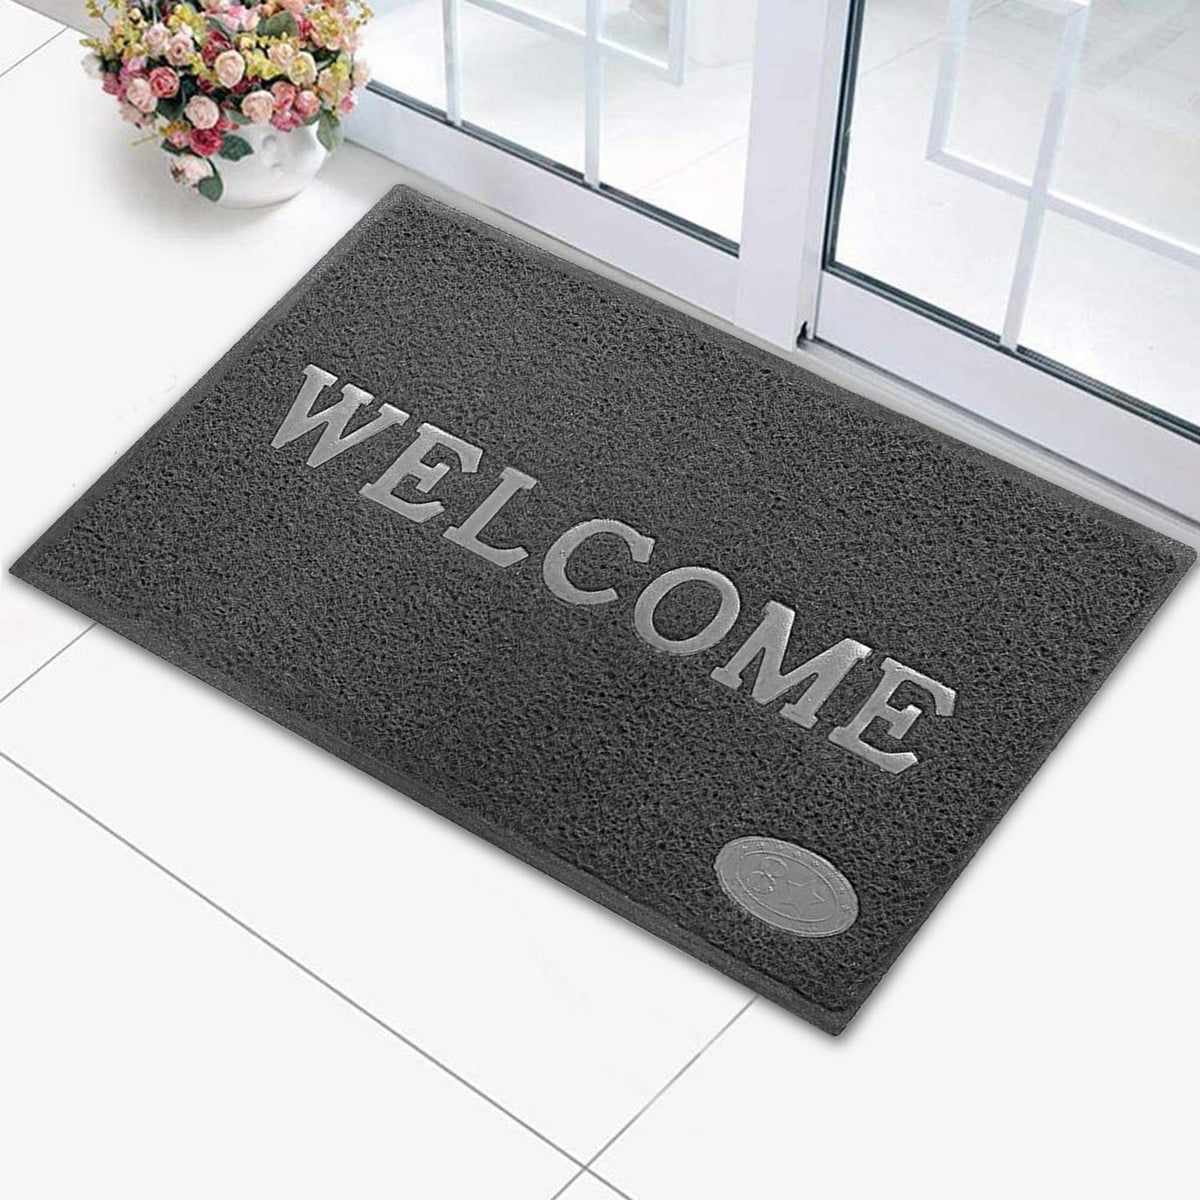 Kuber Industries Rubber Super Absorbent Outdoor Welcome MAT|Non-Slip Net Backing|Heavy Duty & Waterproof|Easy Clean for Entry (Grey)-KUBMART15373